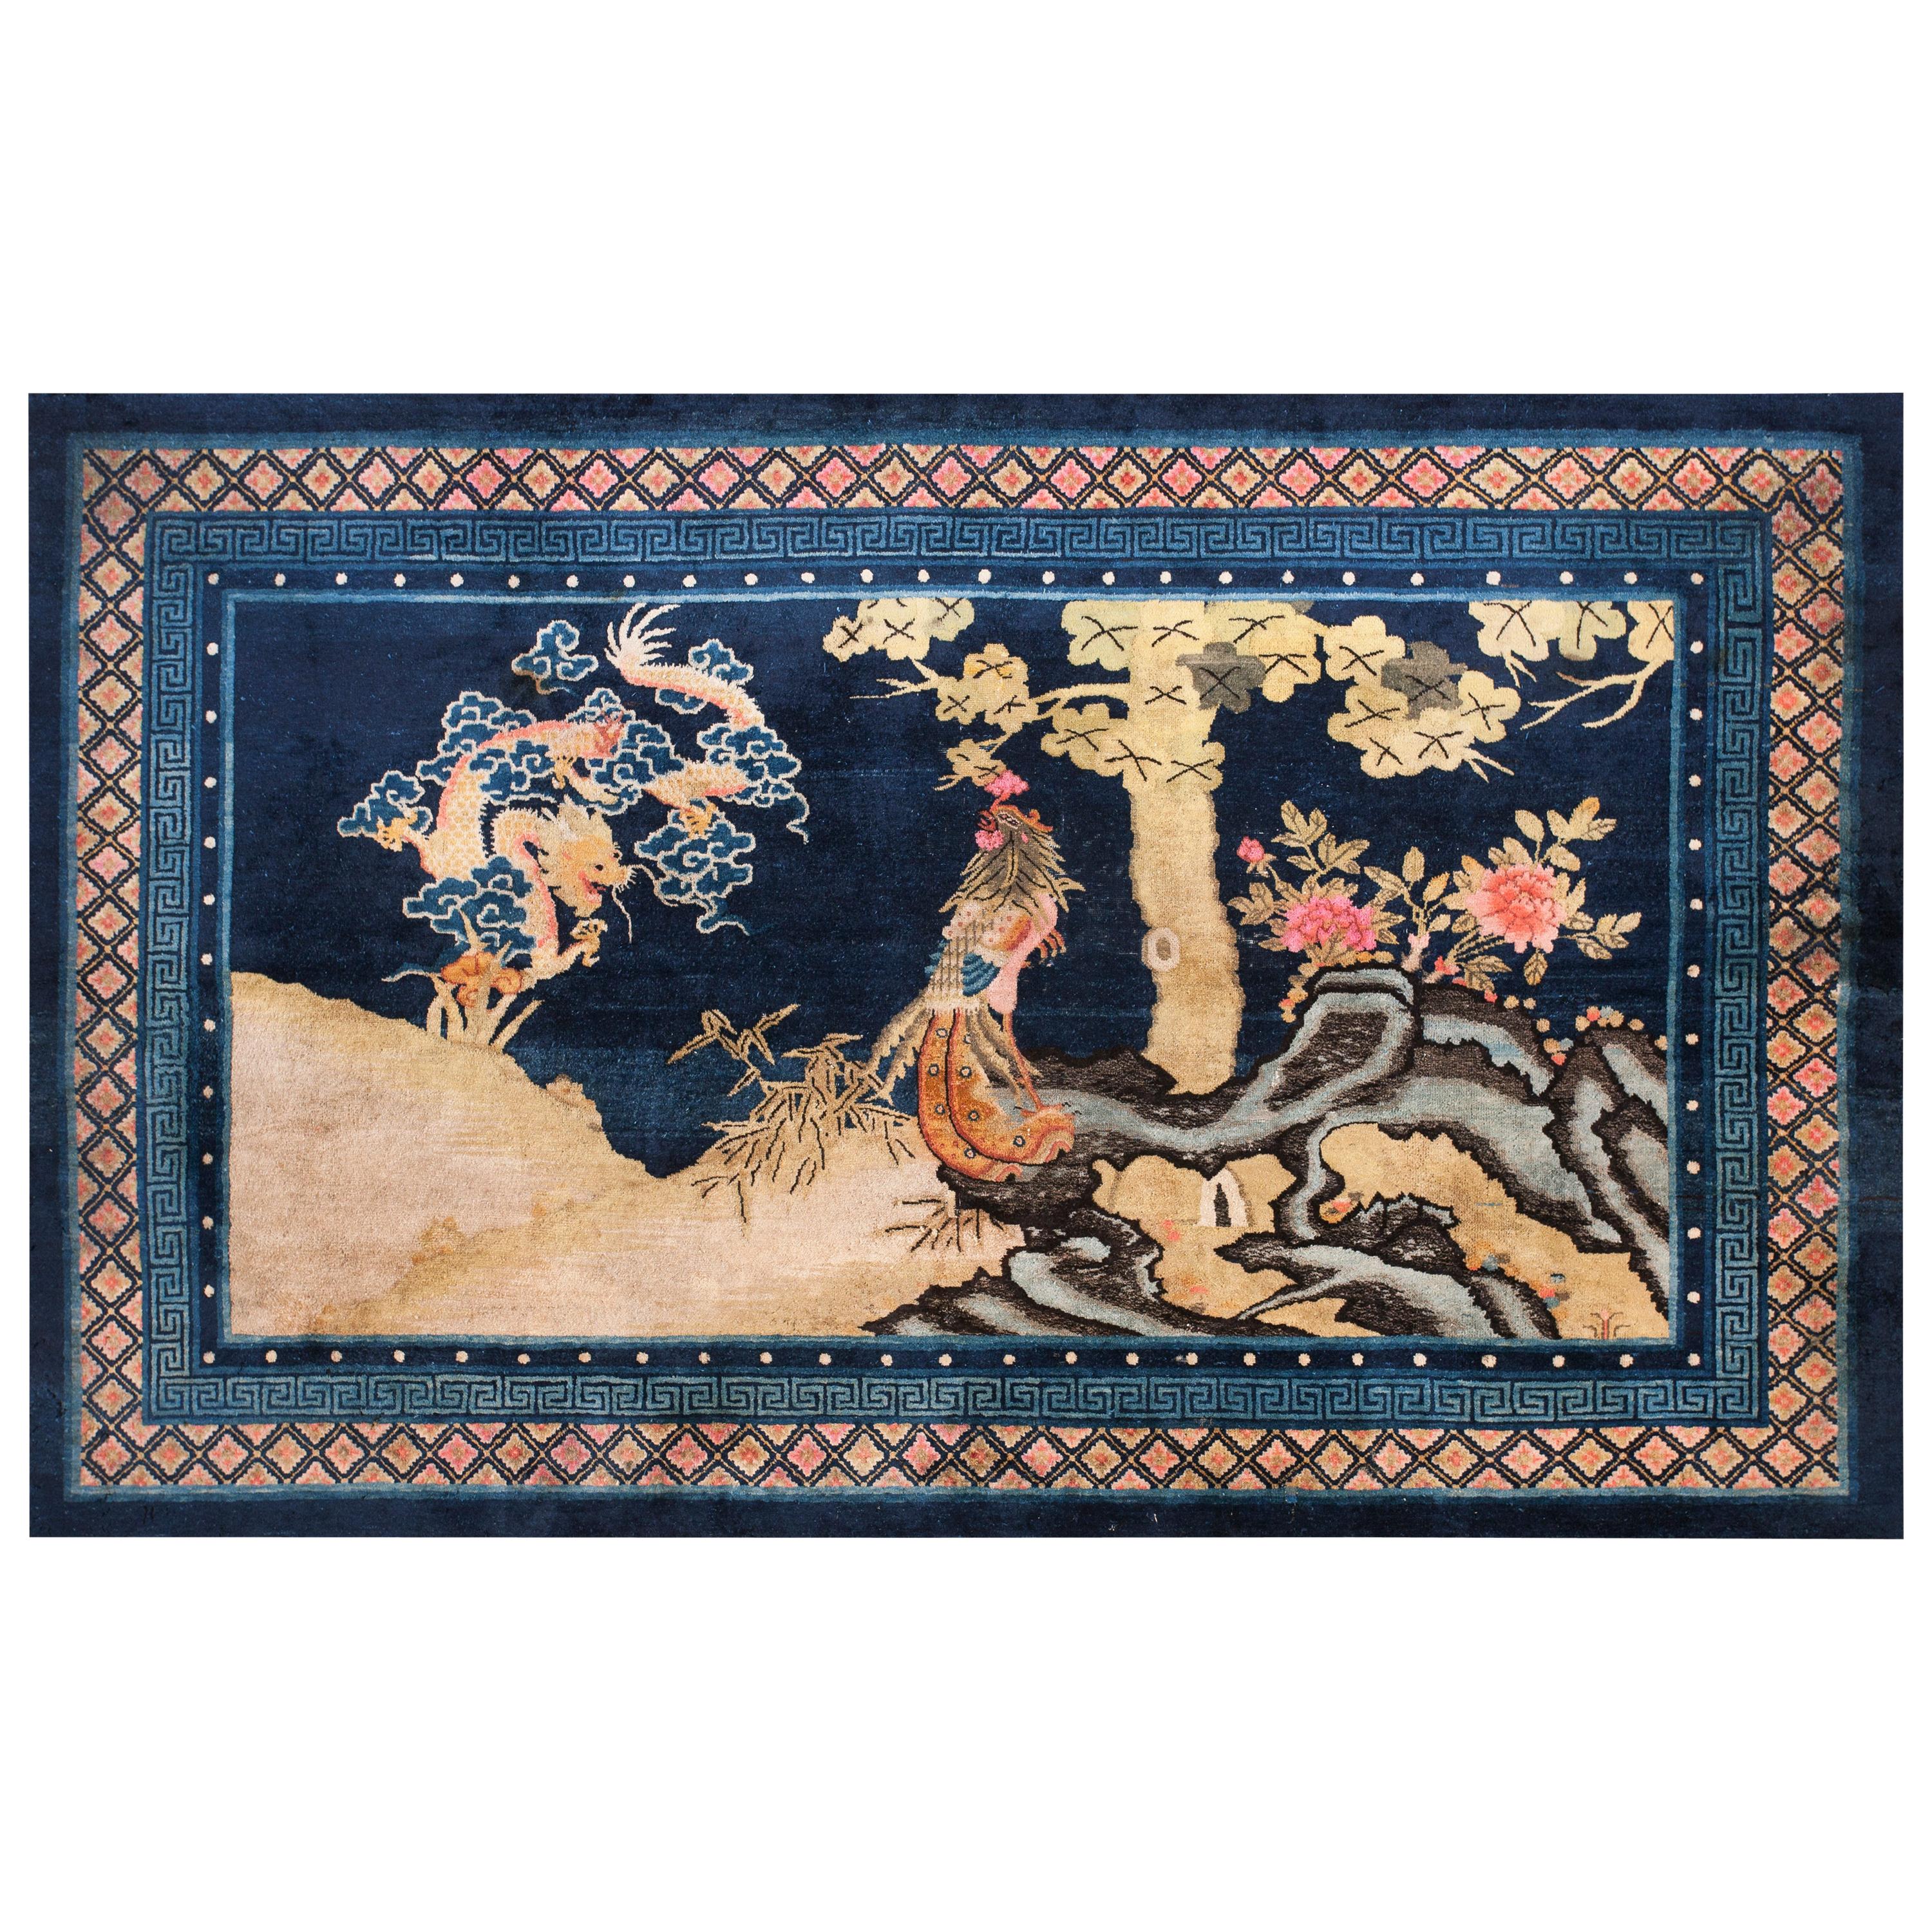 Early 20th Century Chinese Baotou Carpet with Phoenix ( 5'6" x 9' - 168 x 274 ) For Sale